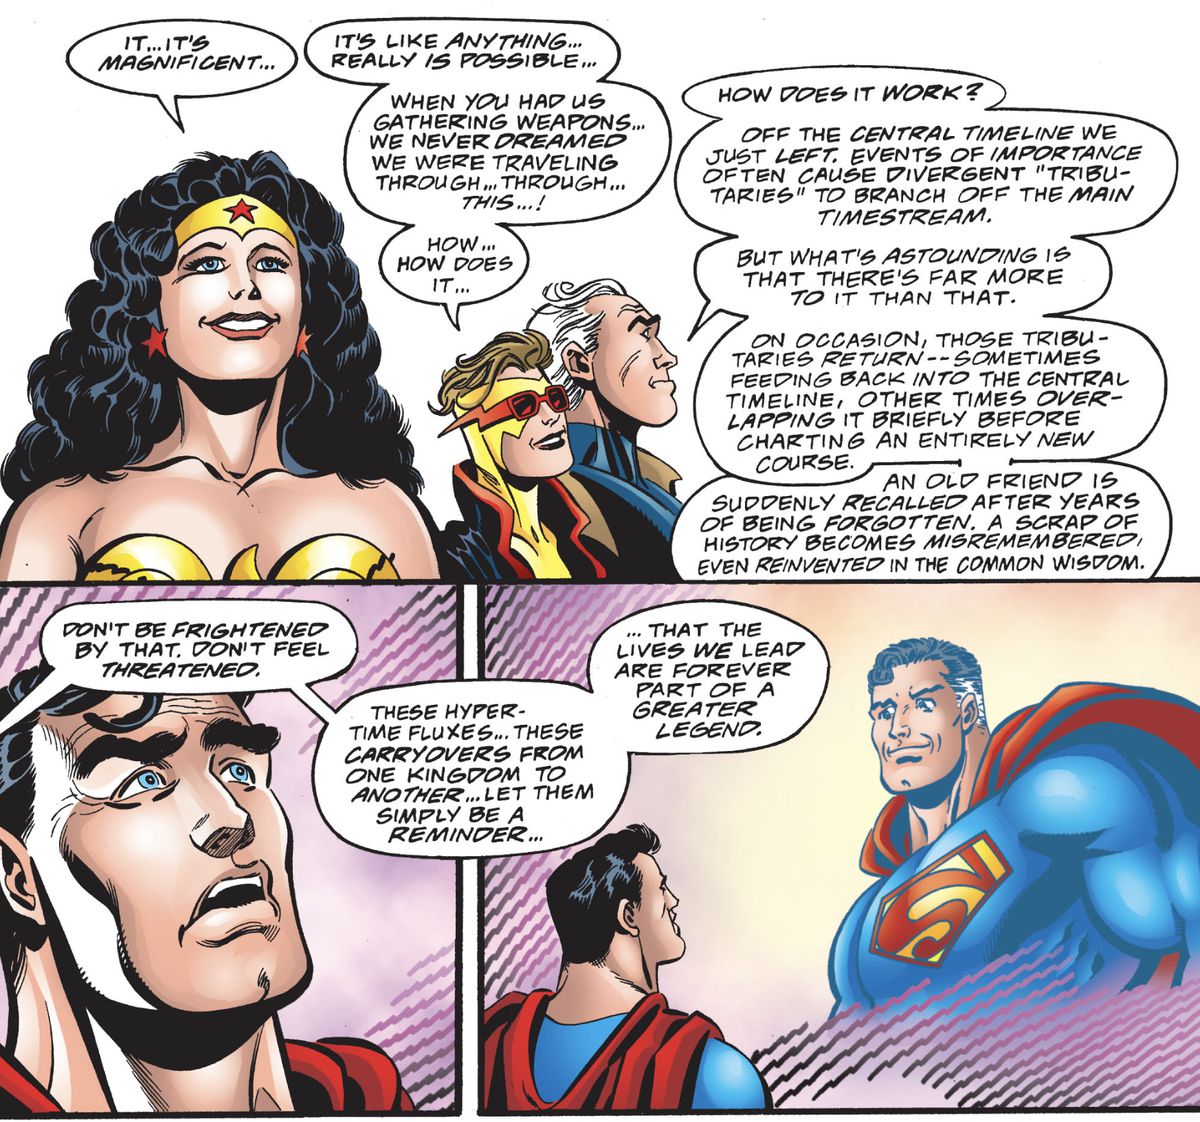 The Phantom Stranger explains how Hypertime works, as Superman gazes up at a vision of another, older Superman, with a swoopy-er S on his chest, in The Kingdom #2 (1999). “An old friend is suddenly recalled after years of being forgotten,” he says, describing what happens when Hypertime streams flow back together, “A scrap of history becomes misremembered, even reinvented in the common wisdom.” 